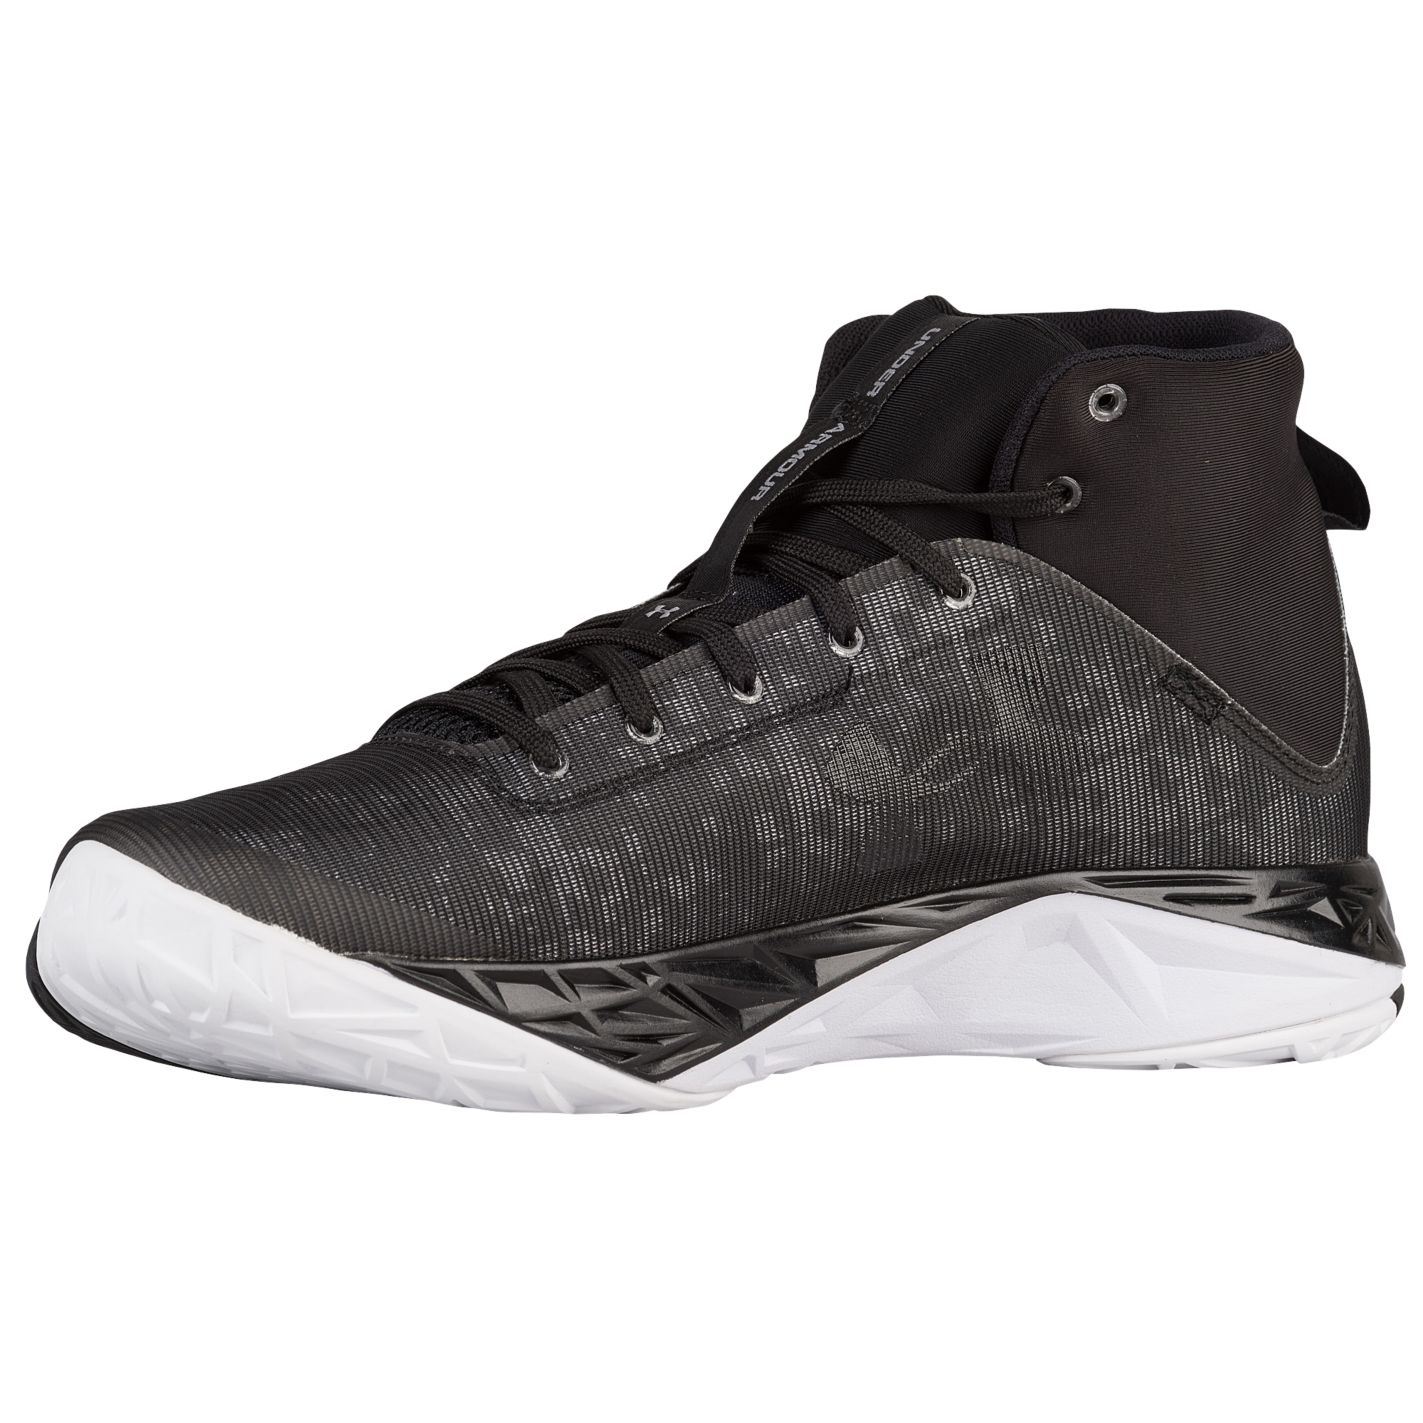 The Under Armour Fire Shot is Available Now 9